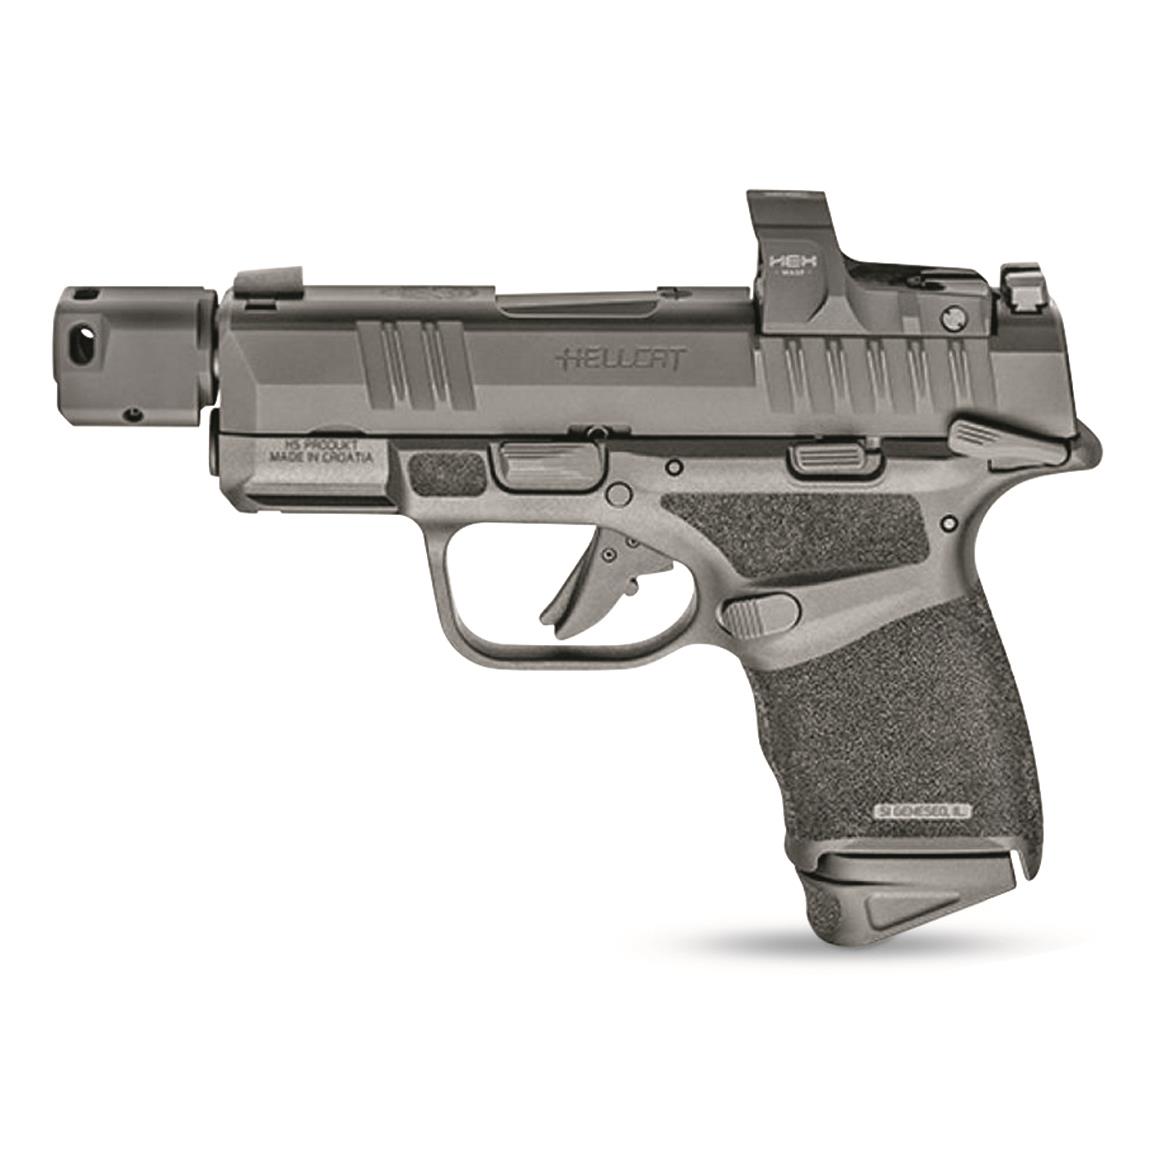 Springfield Hellcat RDP 3.8" Micro-Compact, Semi-auto, 9mm, 3.8" BBL, HEX Wasp Red Dot, 13+1 Rds.